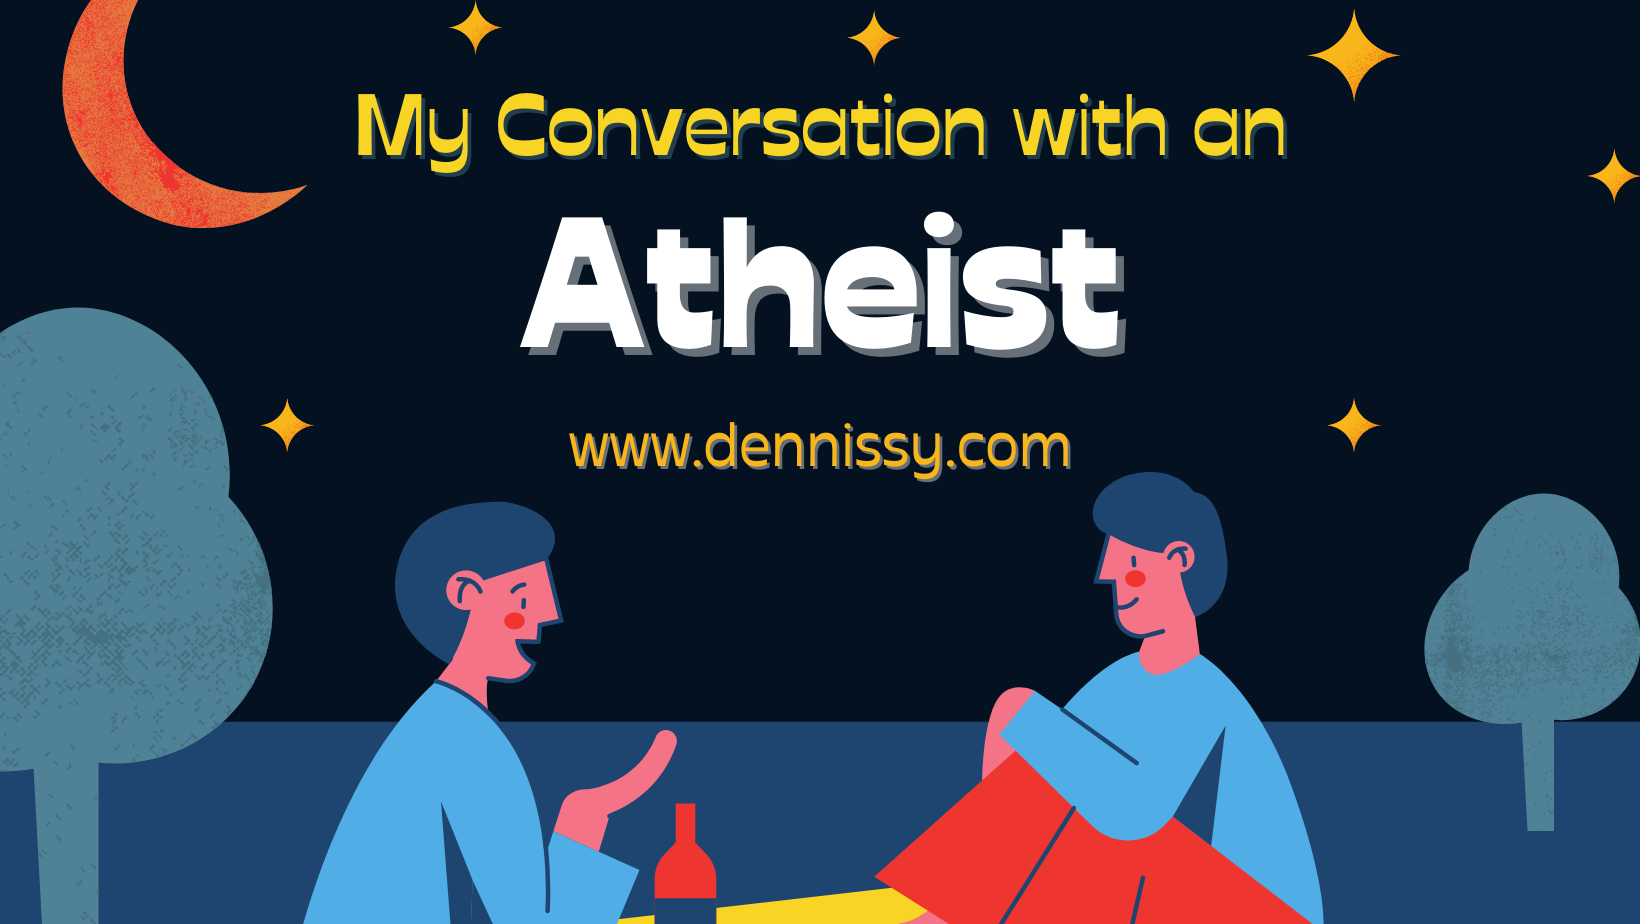 My Conversation with an Atheist